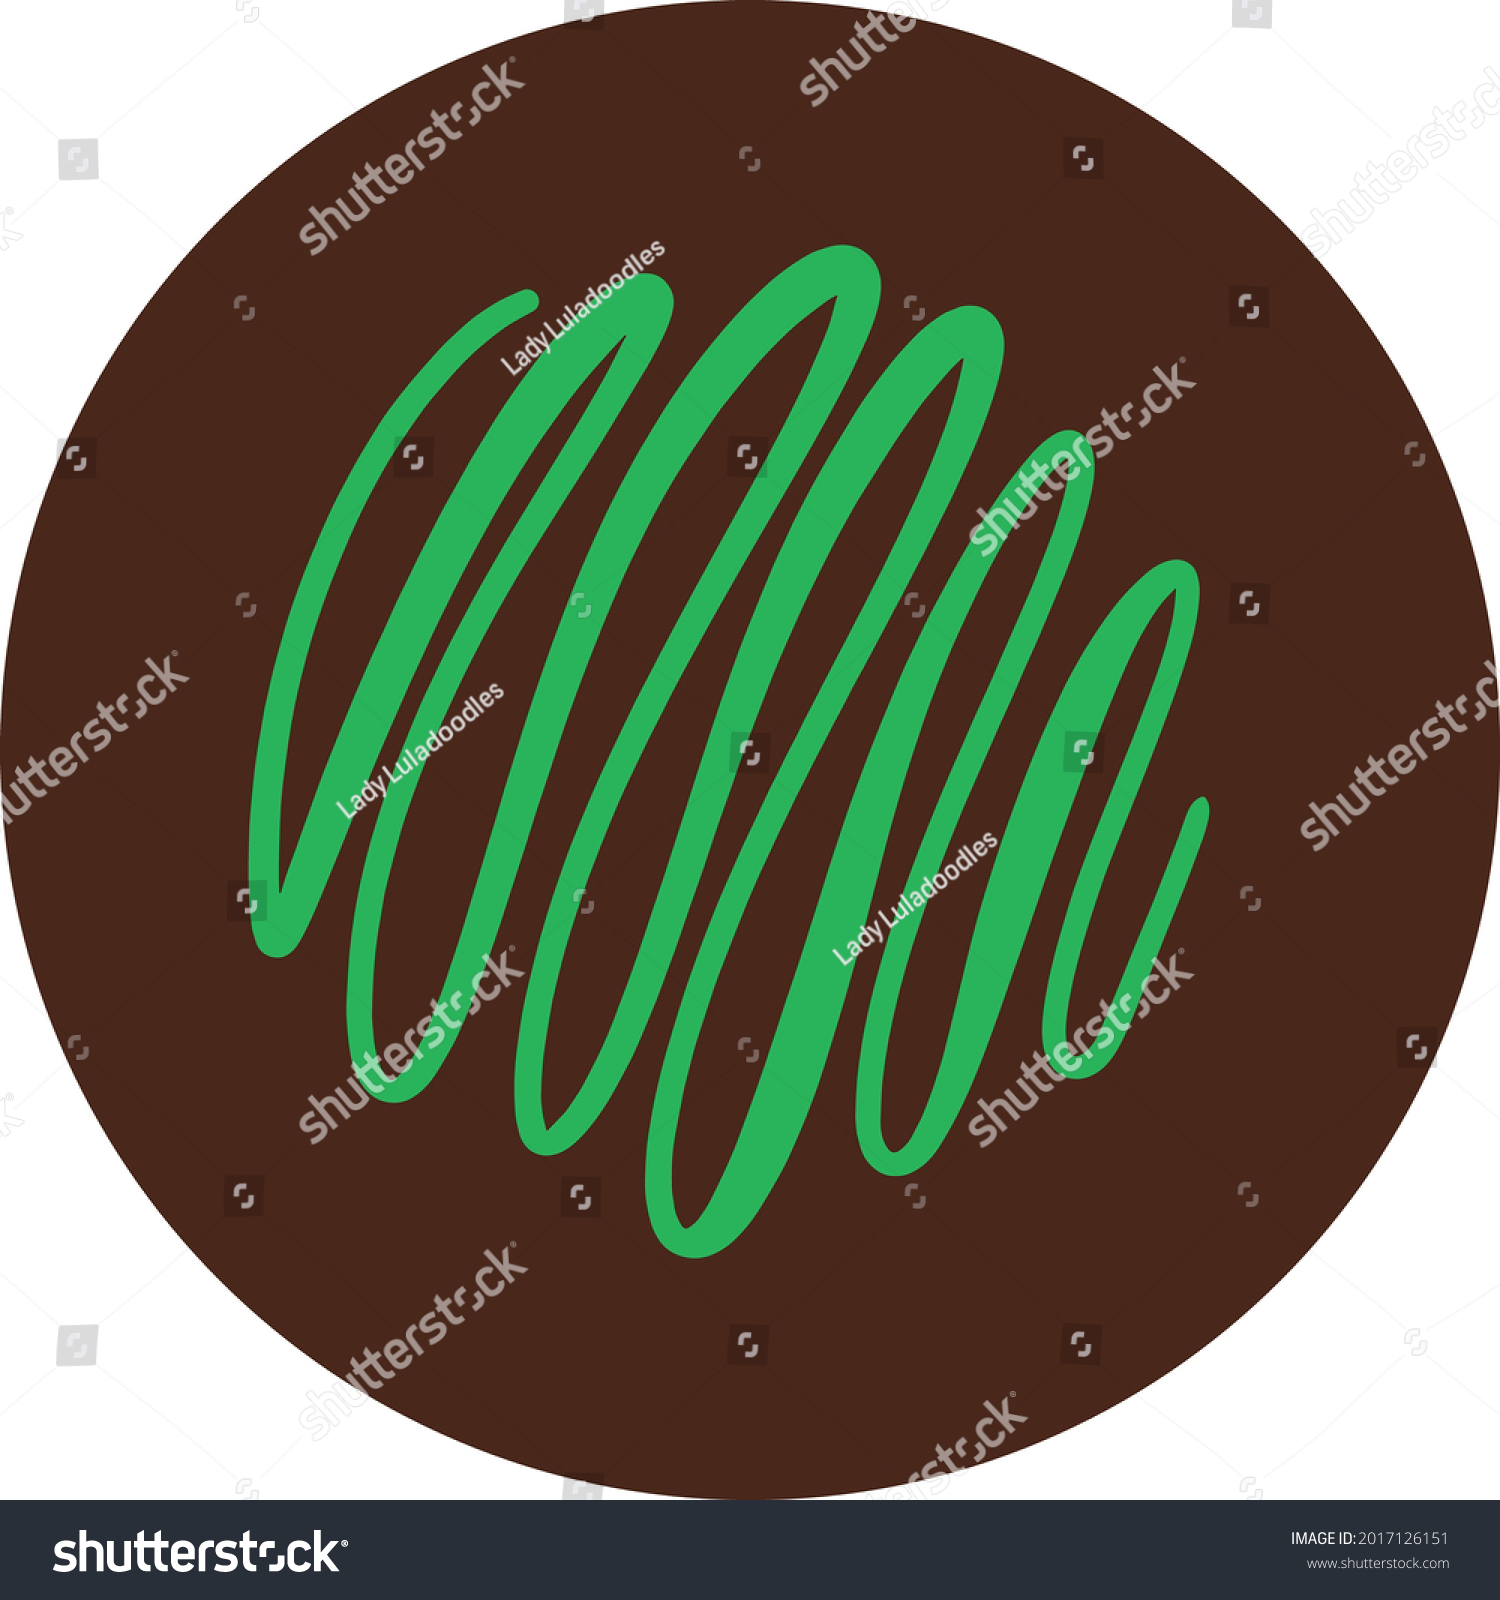 SVG of Circular dark brown Chocolate candy with apple green drizzle. Layered confectionary SVG svg